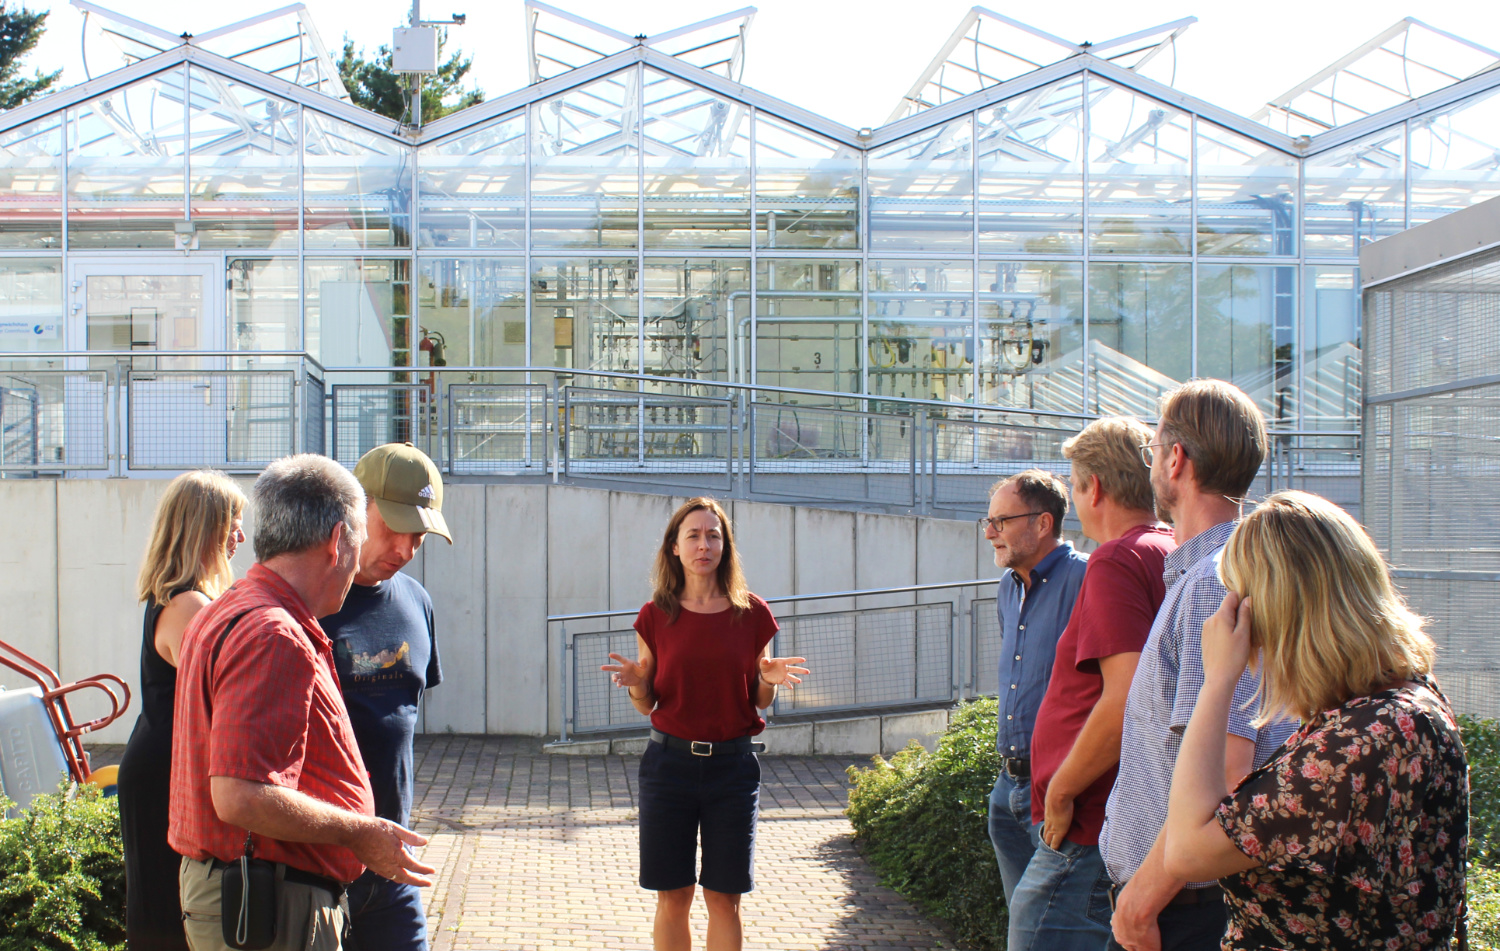 A group of people stands against the backdrop of the elevated gas exchange greenhouse.